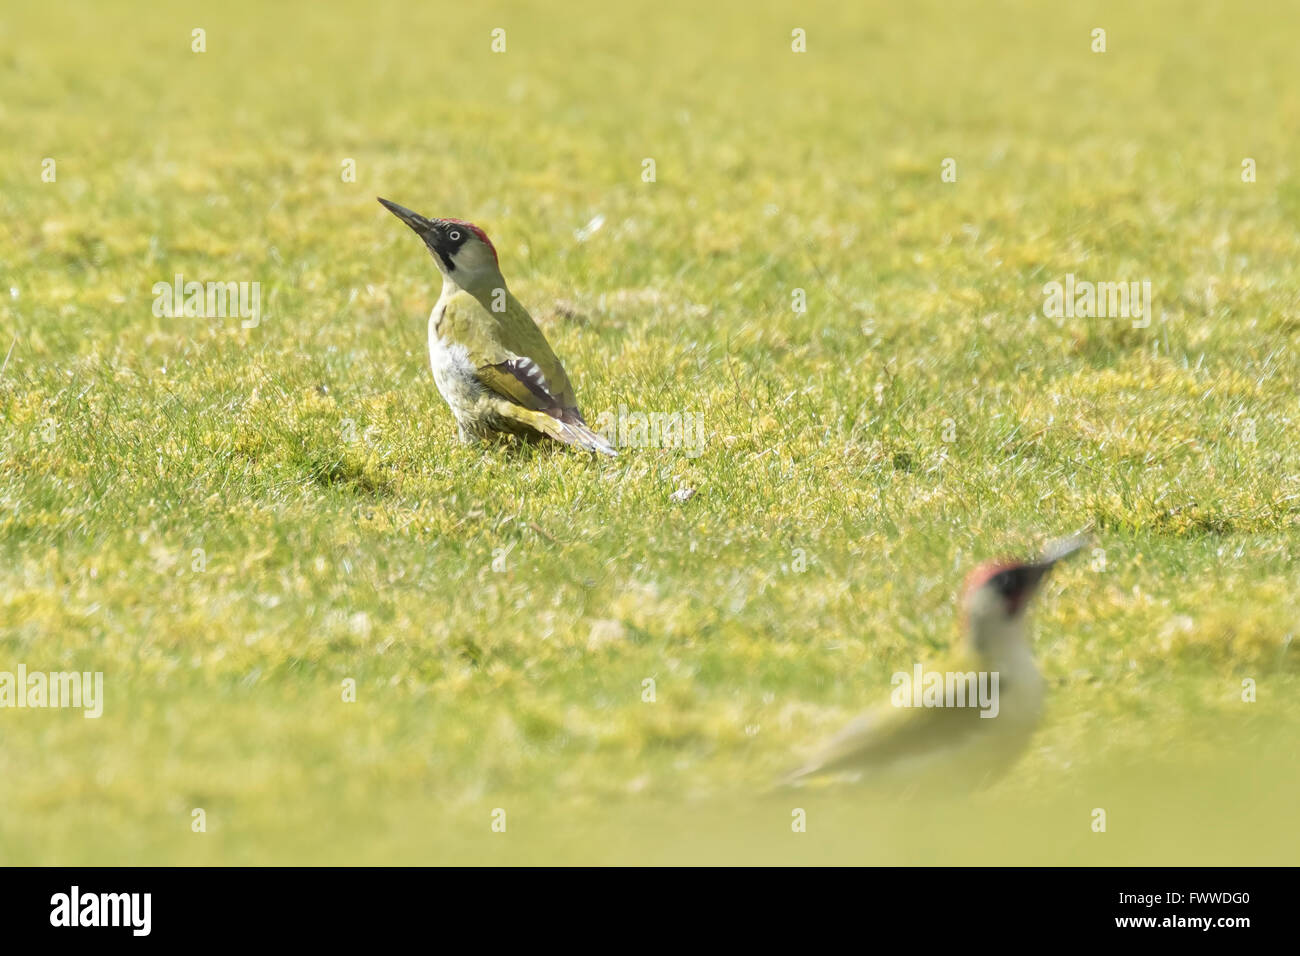 Male and female European green woodpeckers (picus viridis) foraging on a green meadow searching for insects in the grass. Stock Photo